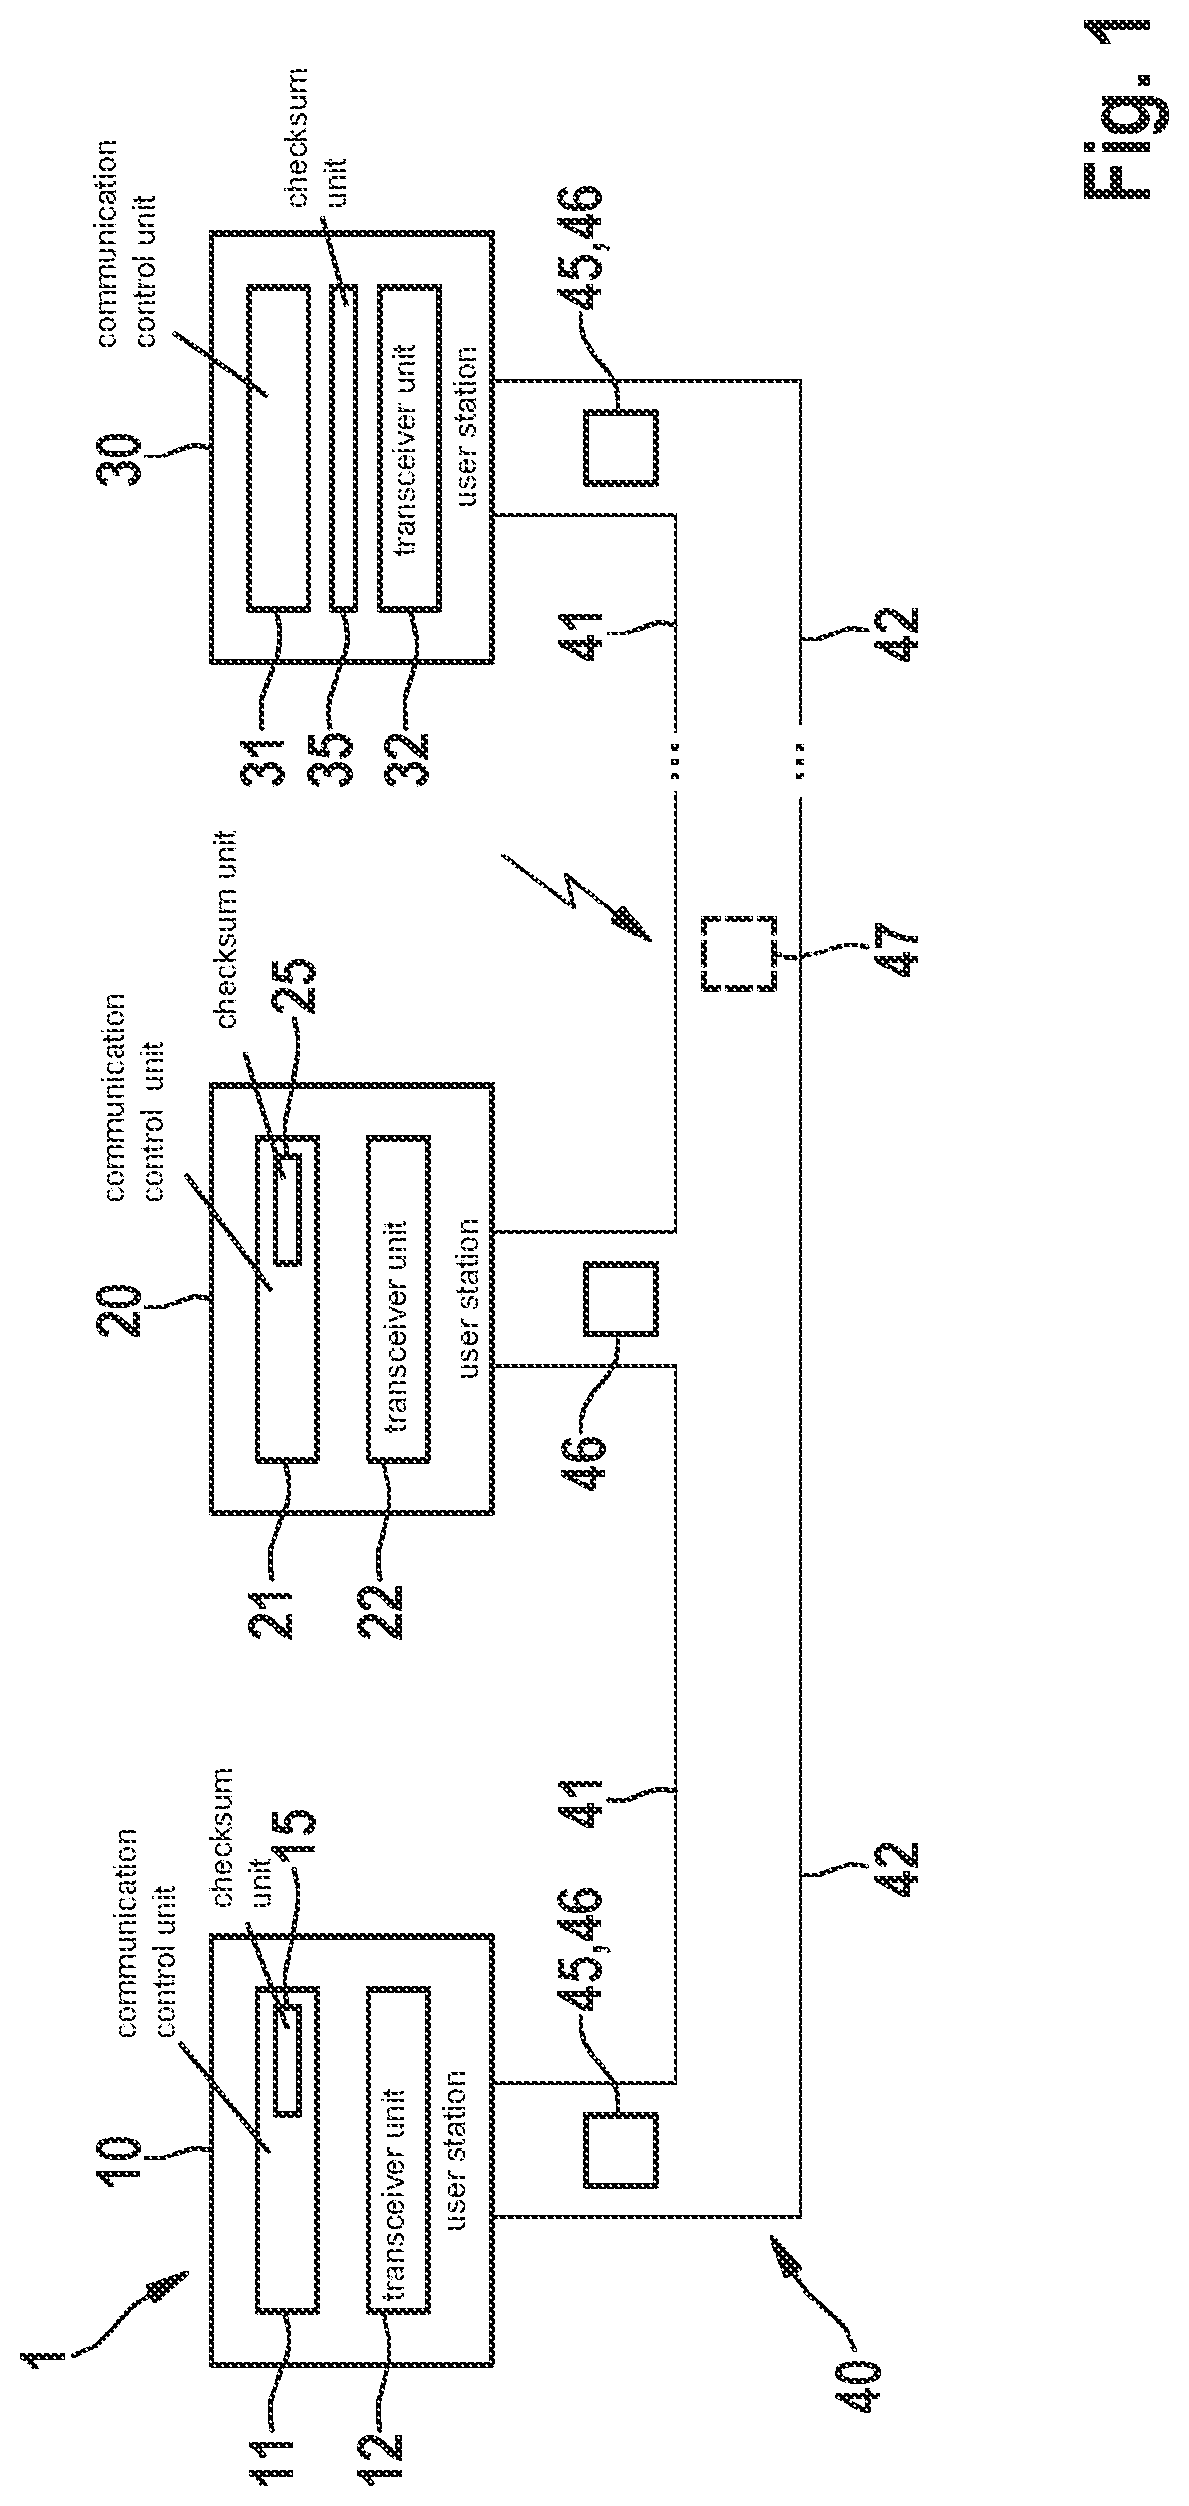 User station for a serial bus system and method for communication in a serial bus system